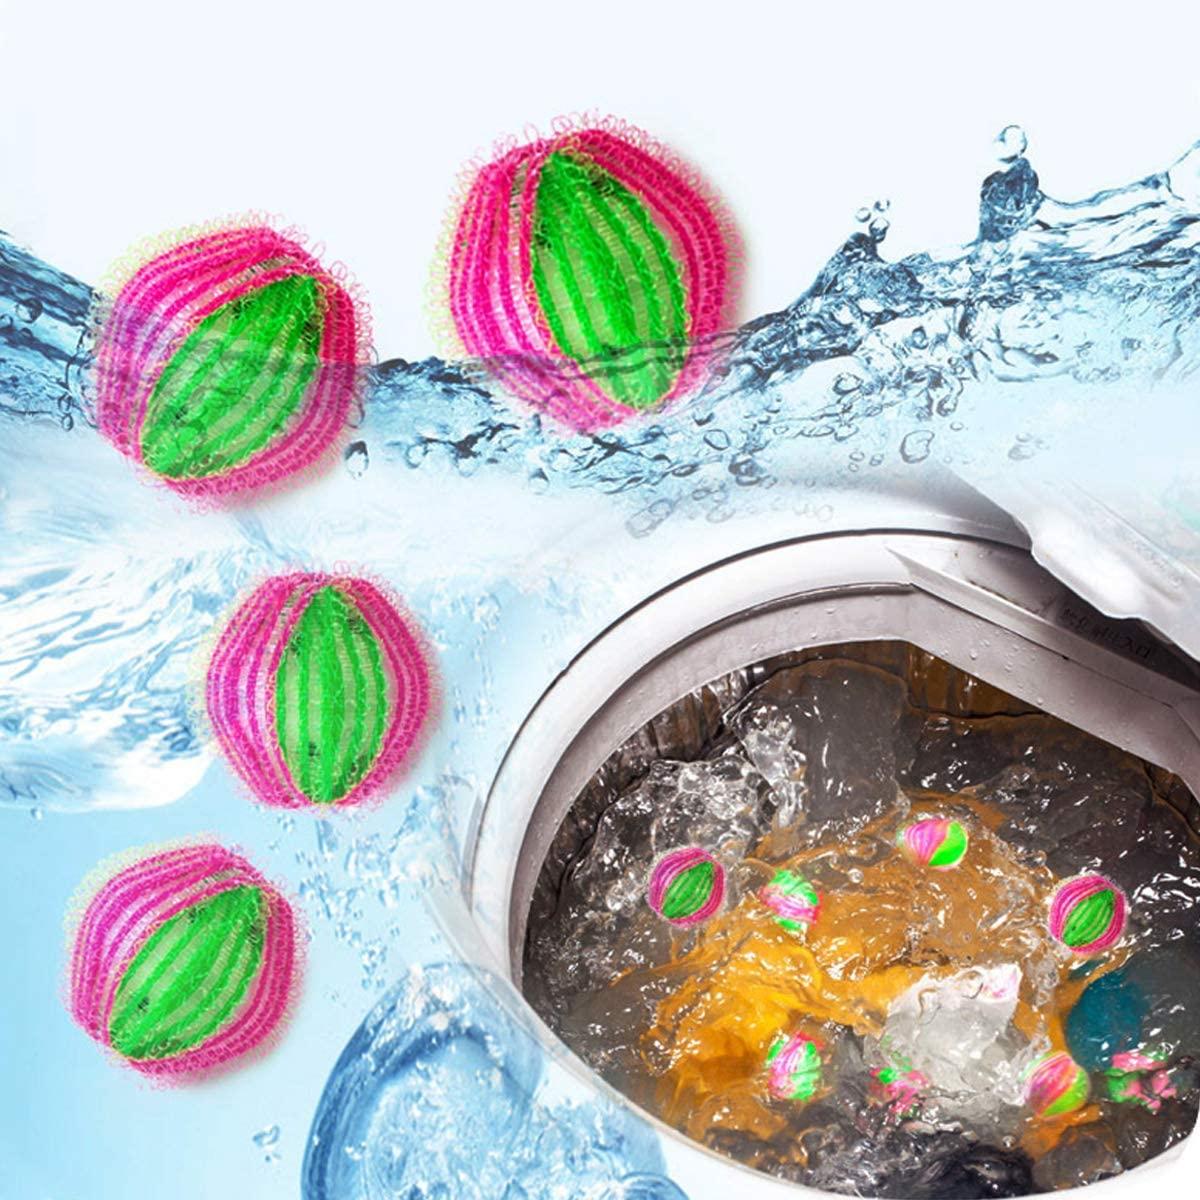 Pet Hair Remover for Laundry - Non-Toxic Reusable Dryer Balls